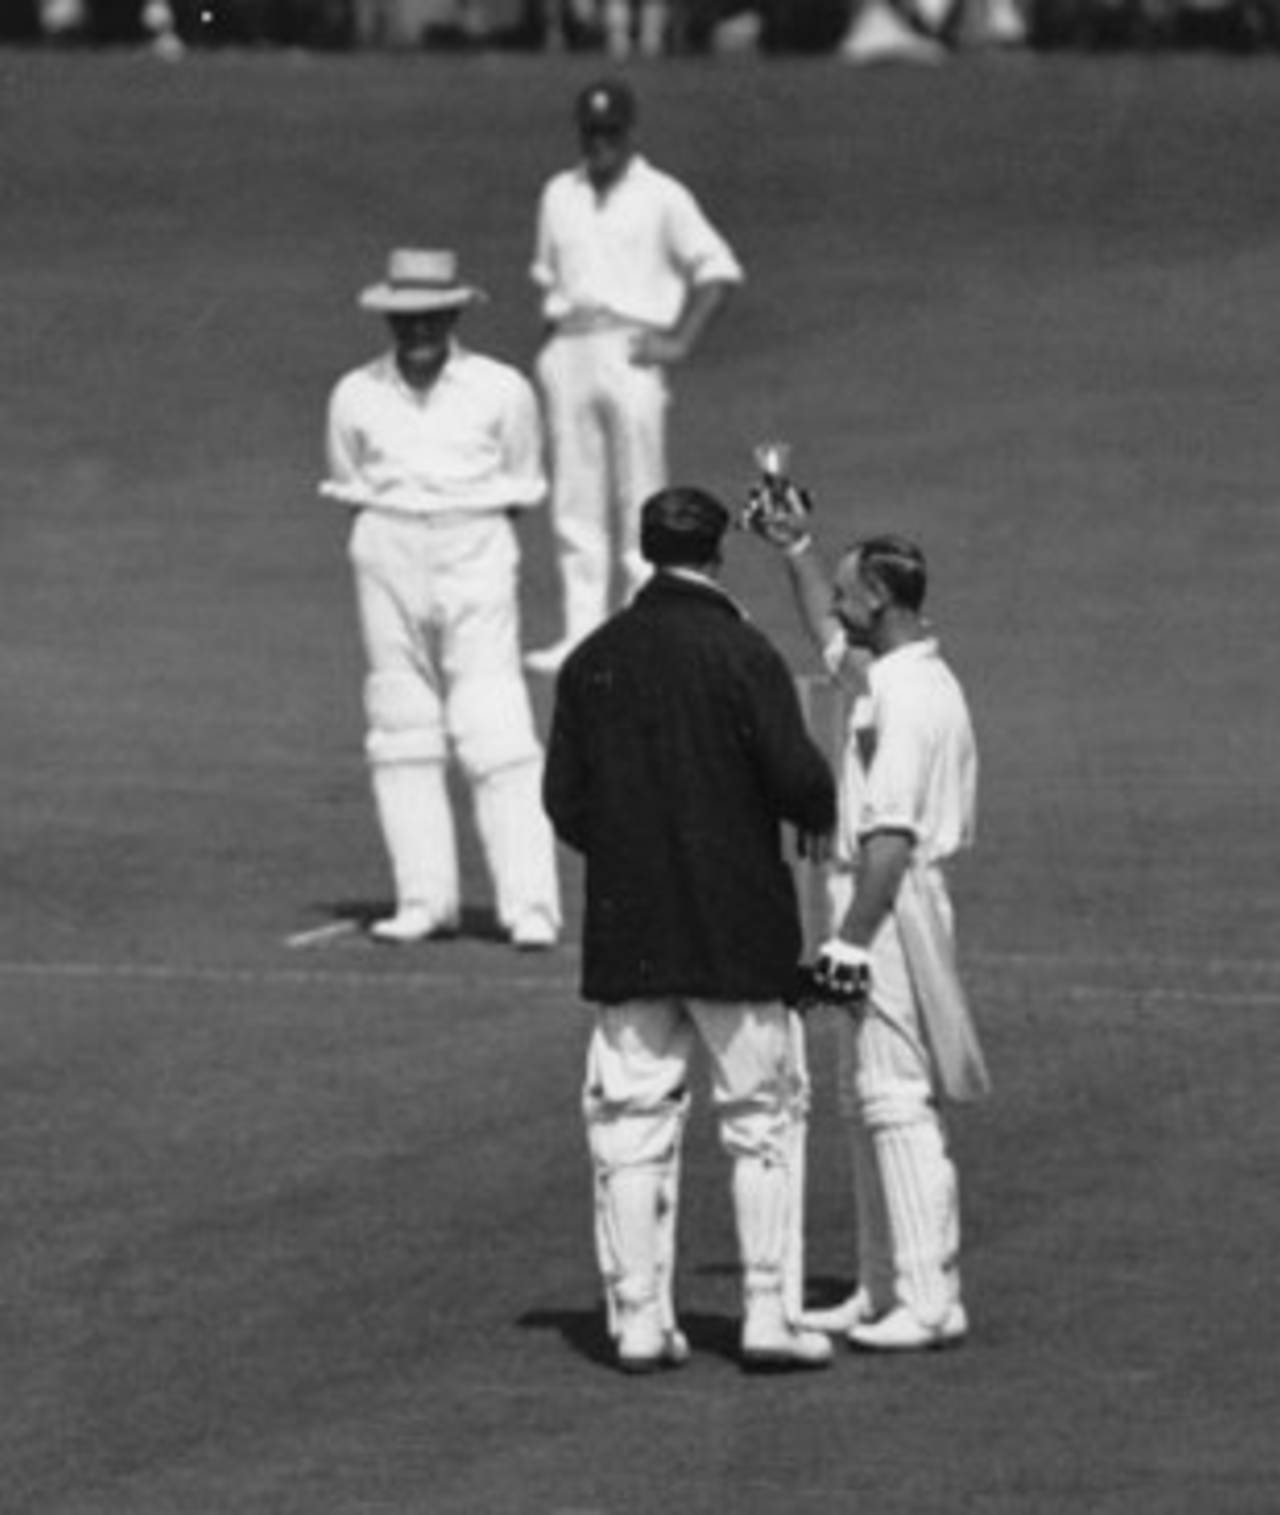 Jack Hobbs toasts the crowd after equalling WG Grace's record of 125 first-class centuries, Somerset v Surrey, Taunton, August 17, 1925